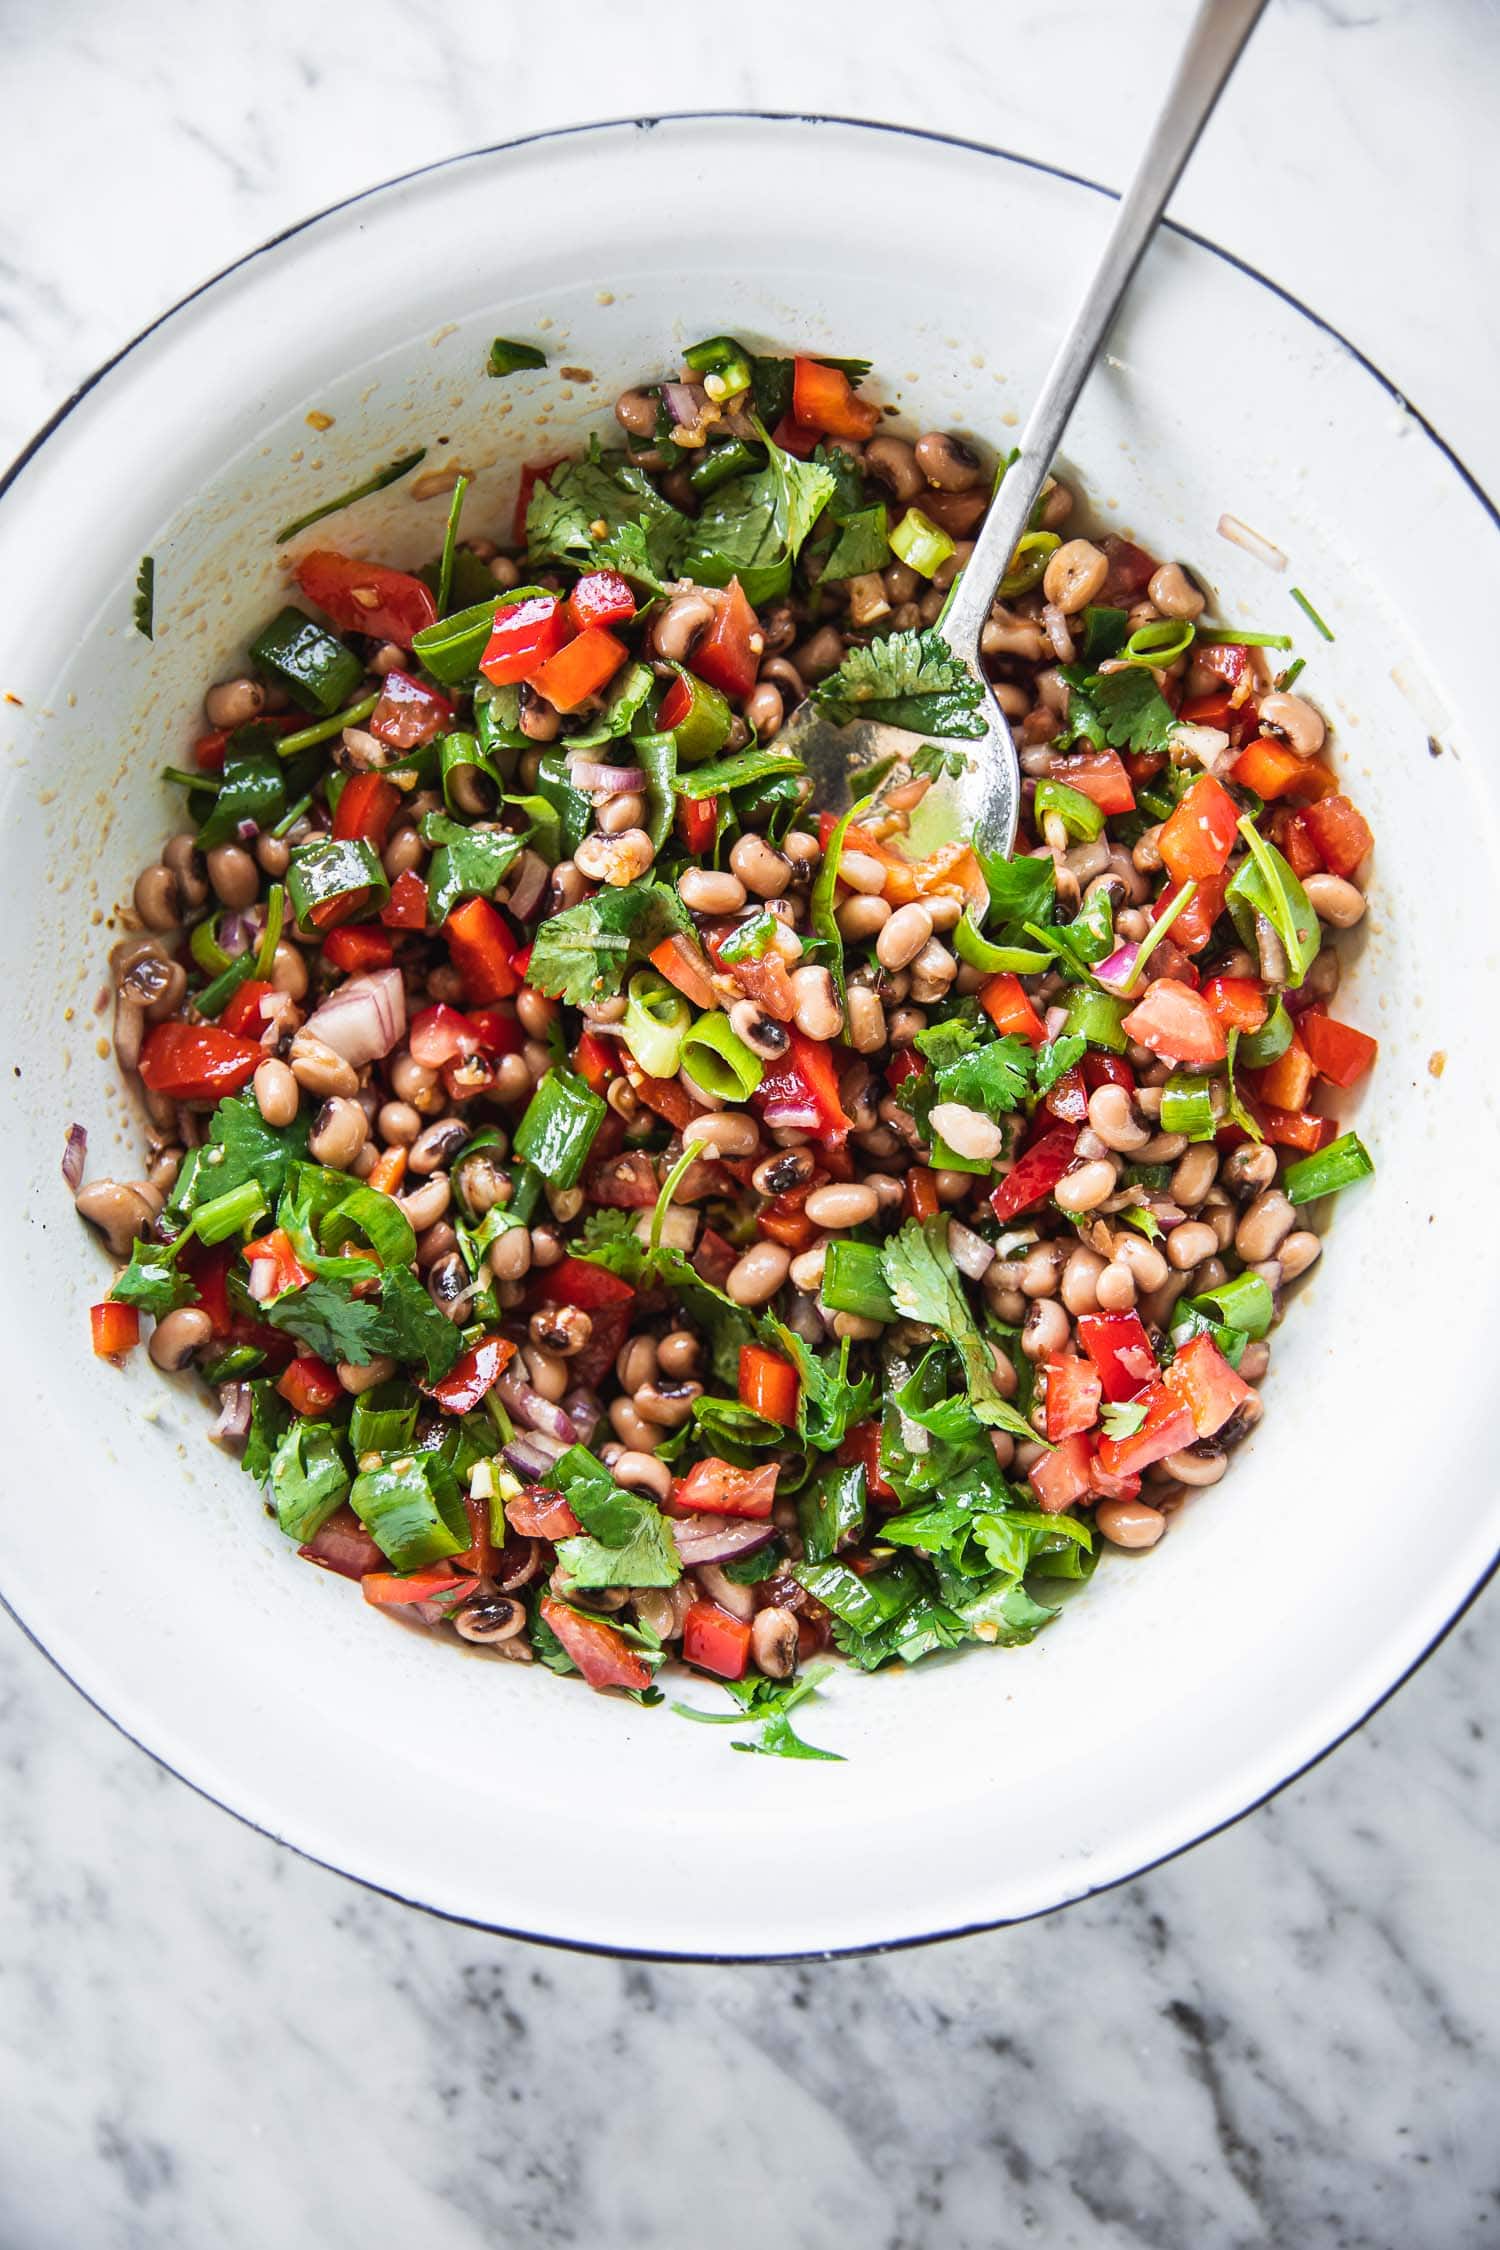 Fully assembled Texas Caviar in a bowl made with black eyed peas, chopped salad veggies, chilli, coriander and a zesty lemony dressing spiked with Tabasco sauce.